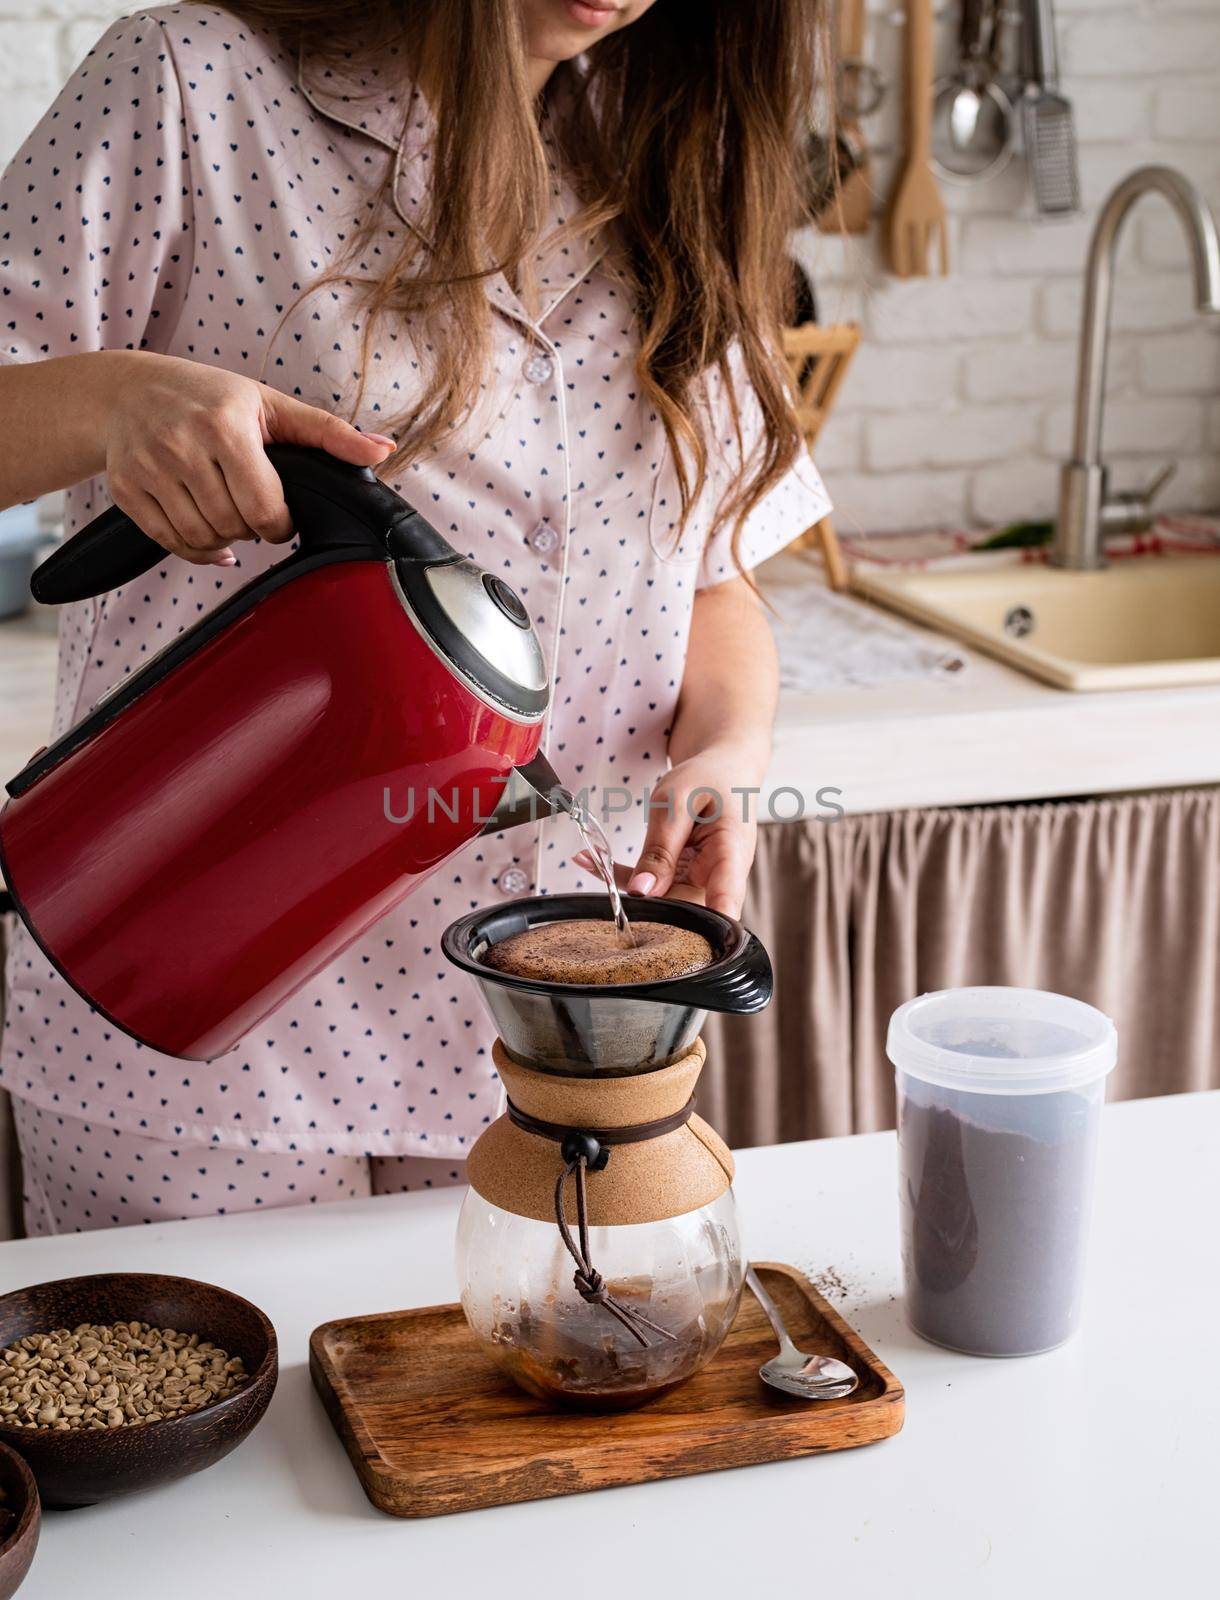 Alternative coffee brewing. young woman in lovely pajamas making coffee at home kitchen